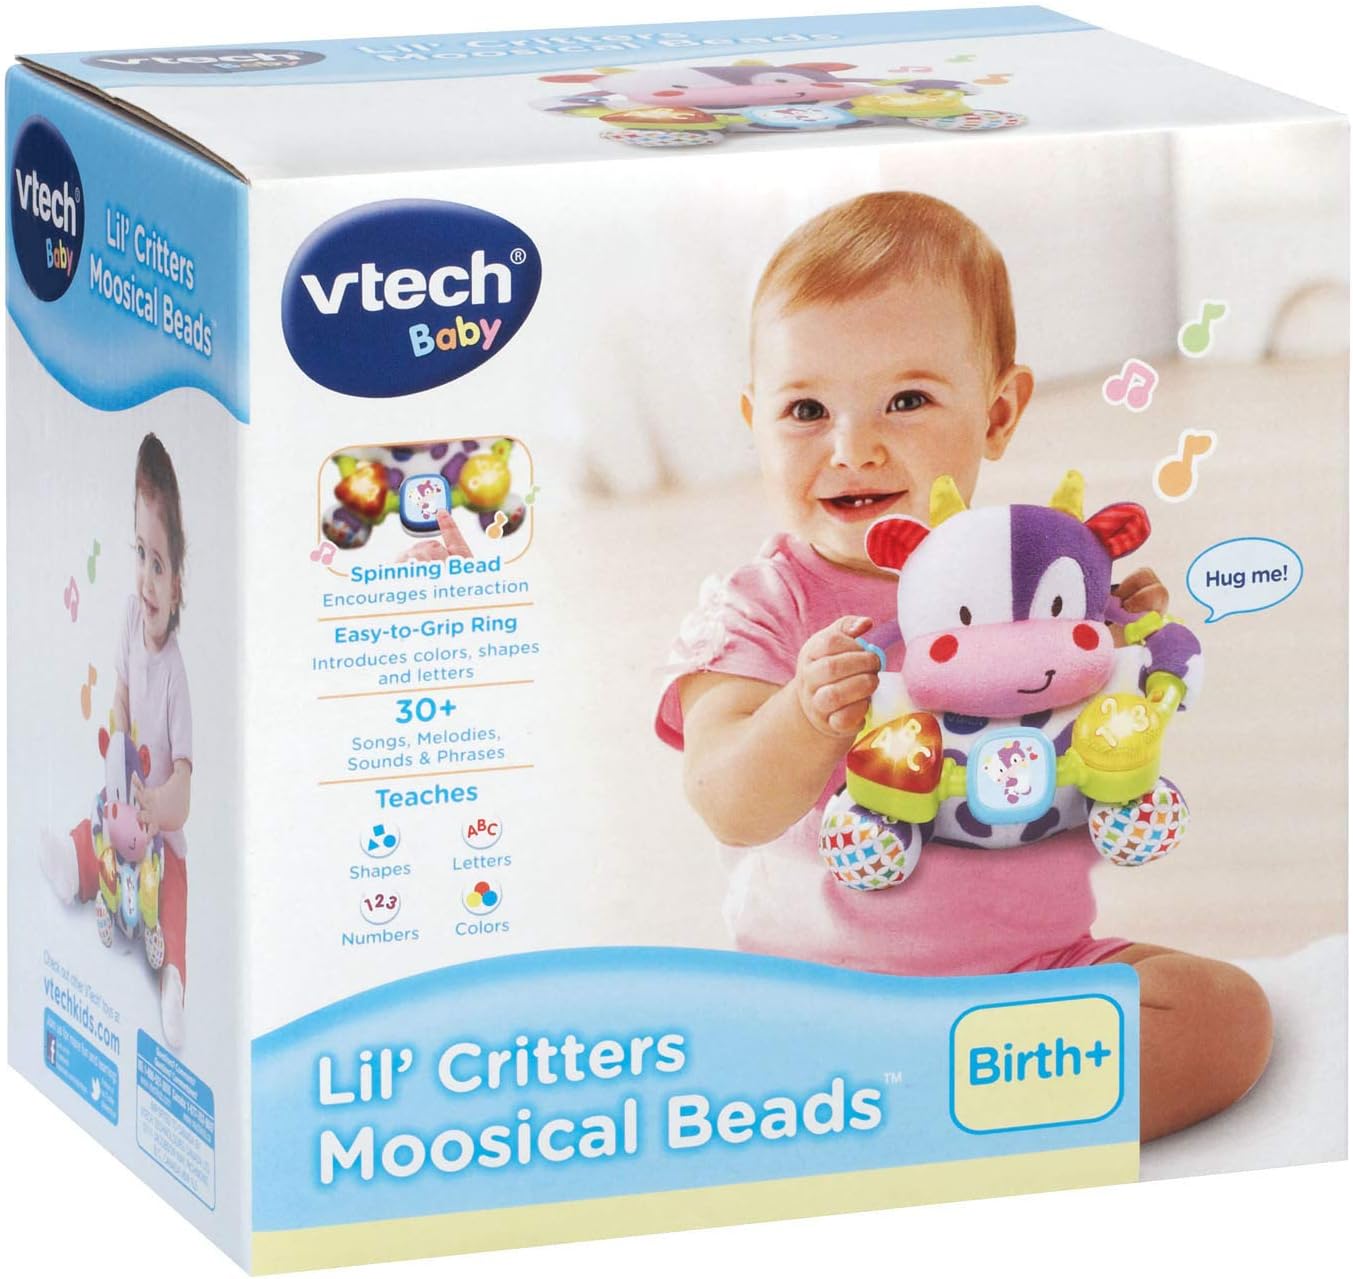 VTech Baby Lil Critters Moosical Beads Amazon Exclusive, Purple Small